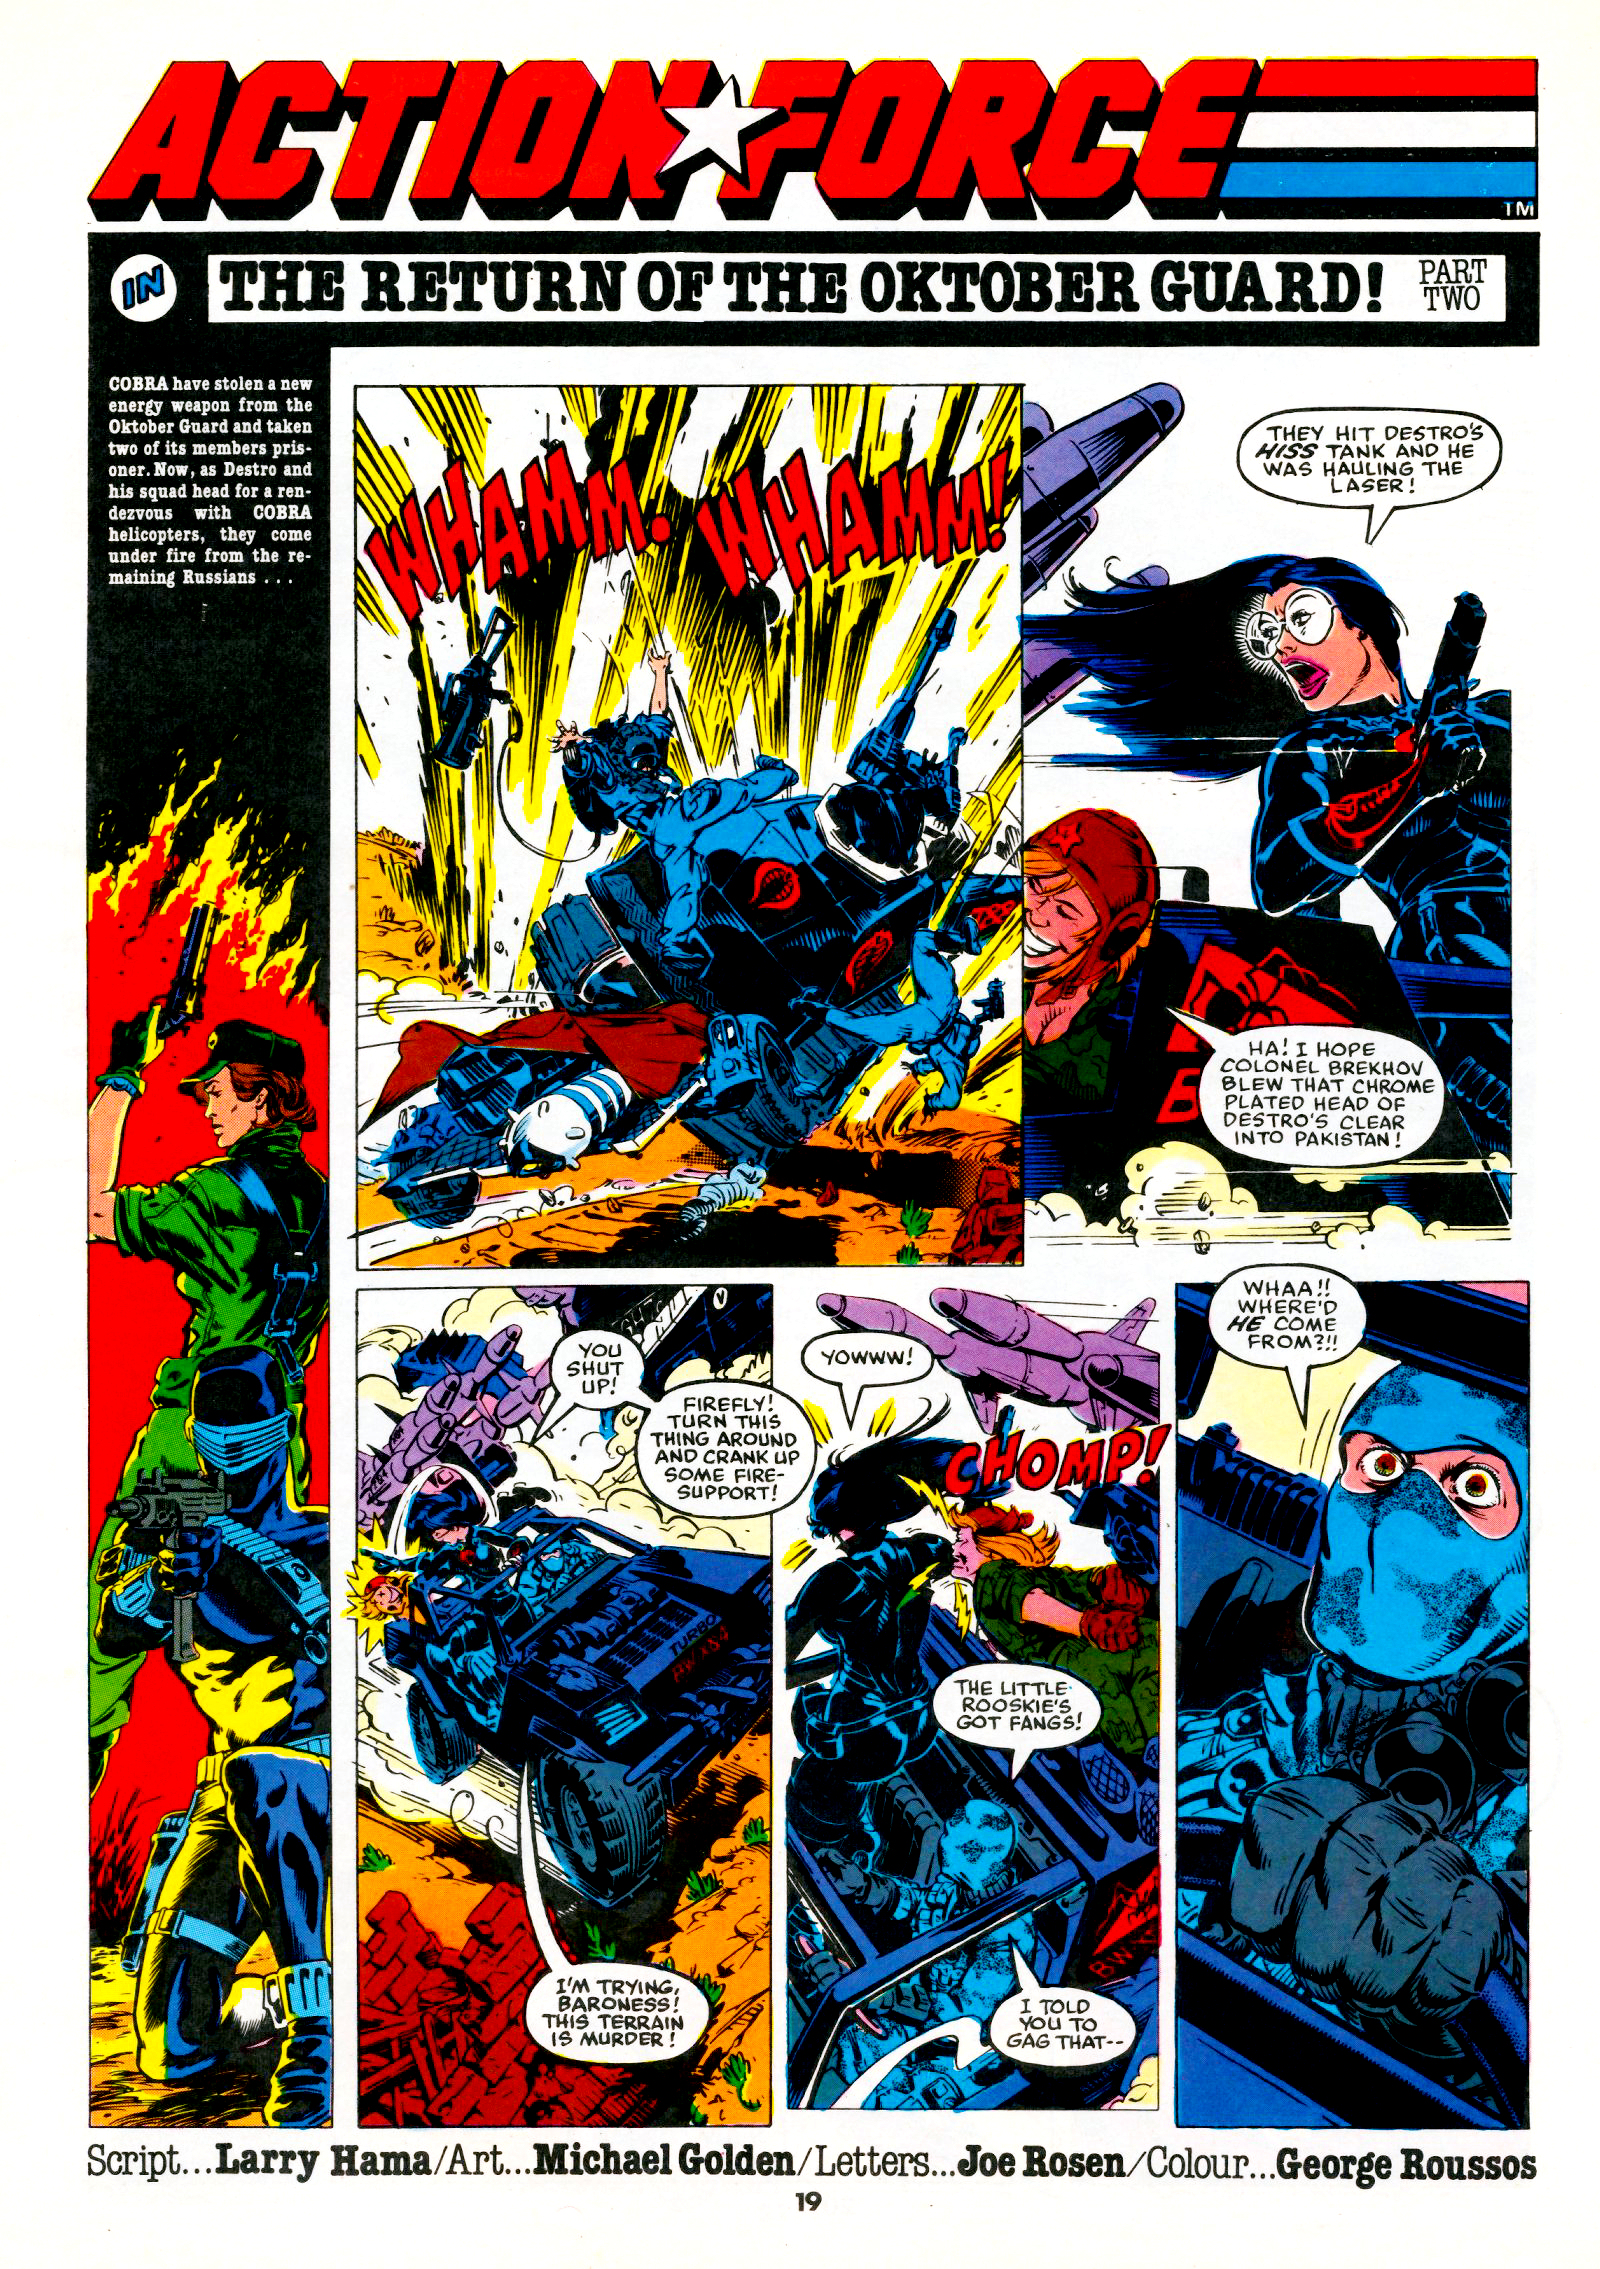 Read online Action Force comic -  Issue #31 - 23